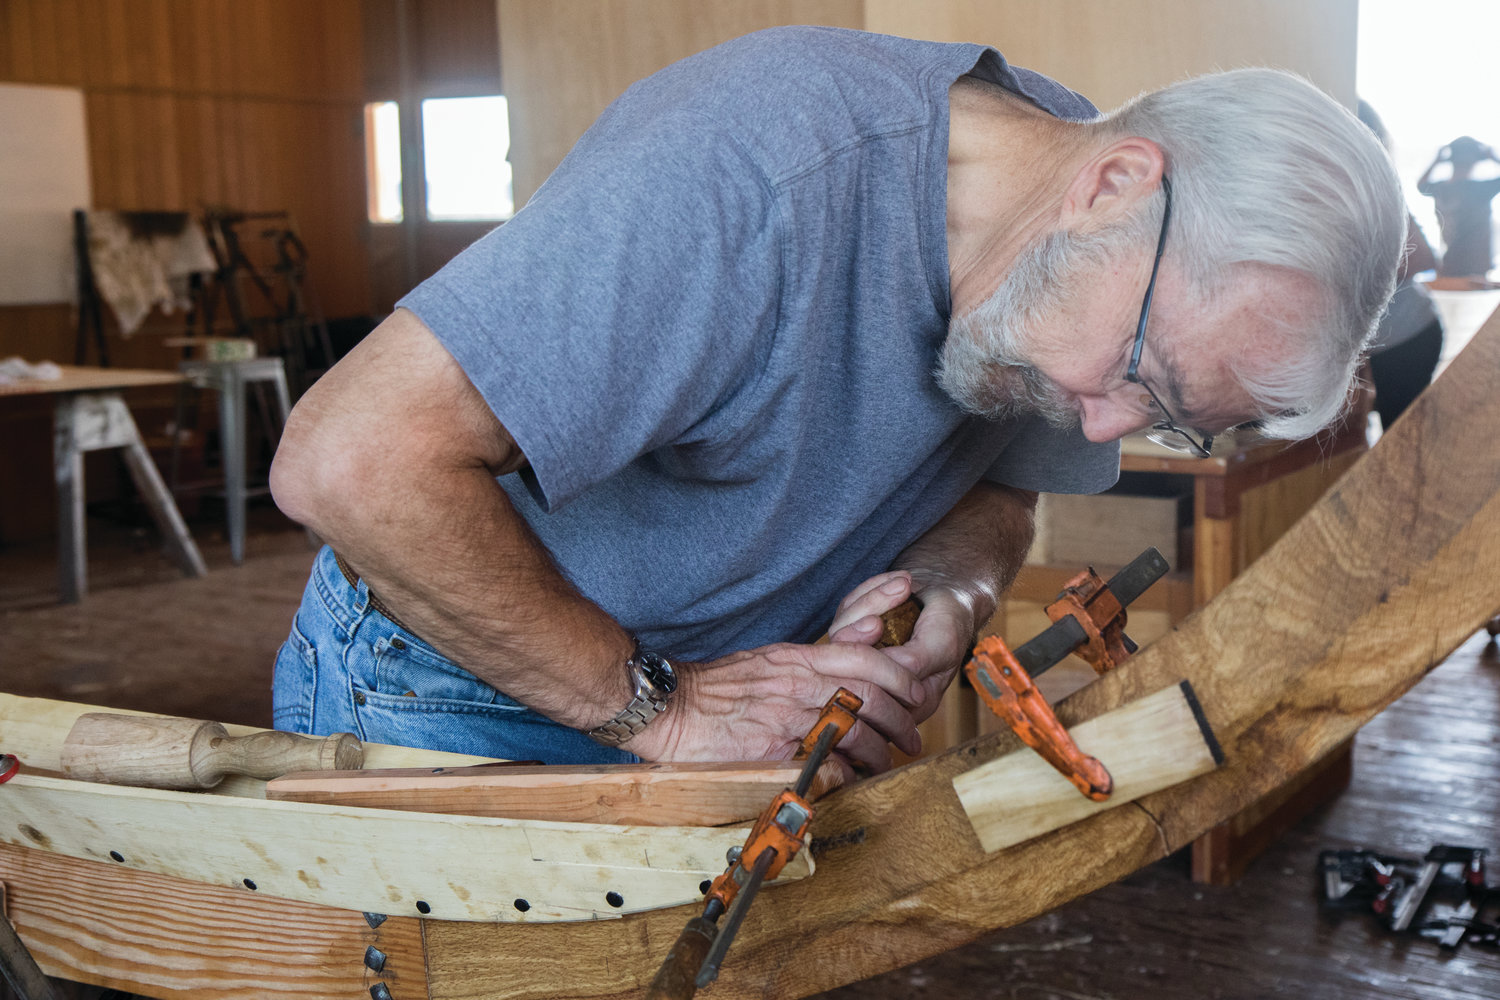 Designing as they go, Viking-method boat builders rely on knowledge of their materials and the demands of seafaring to build each boat unlike any other.